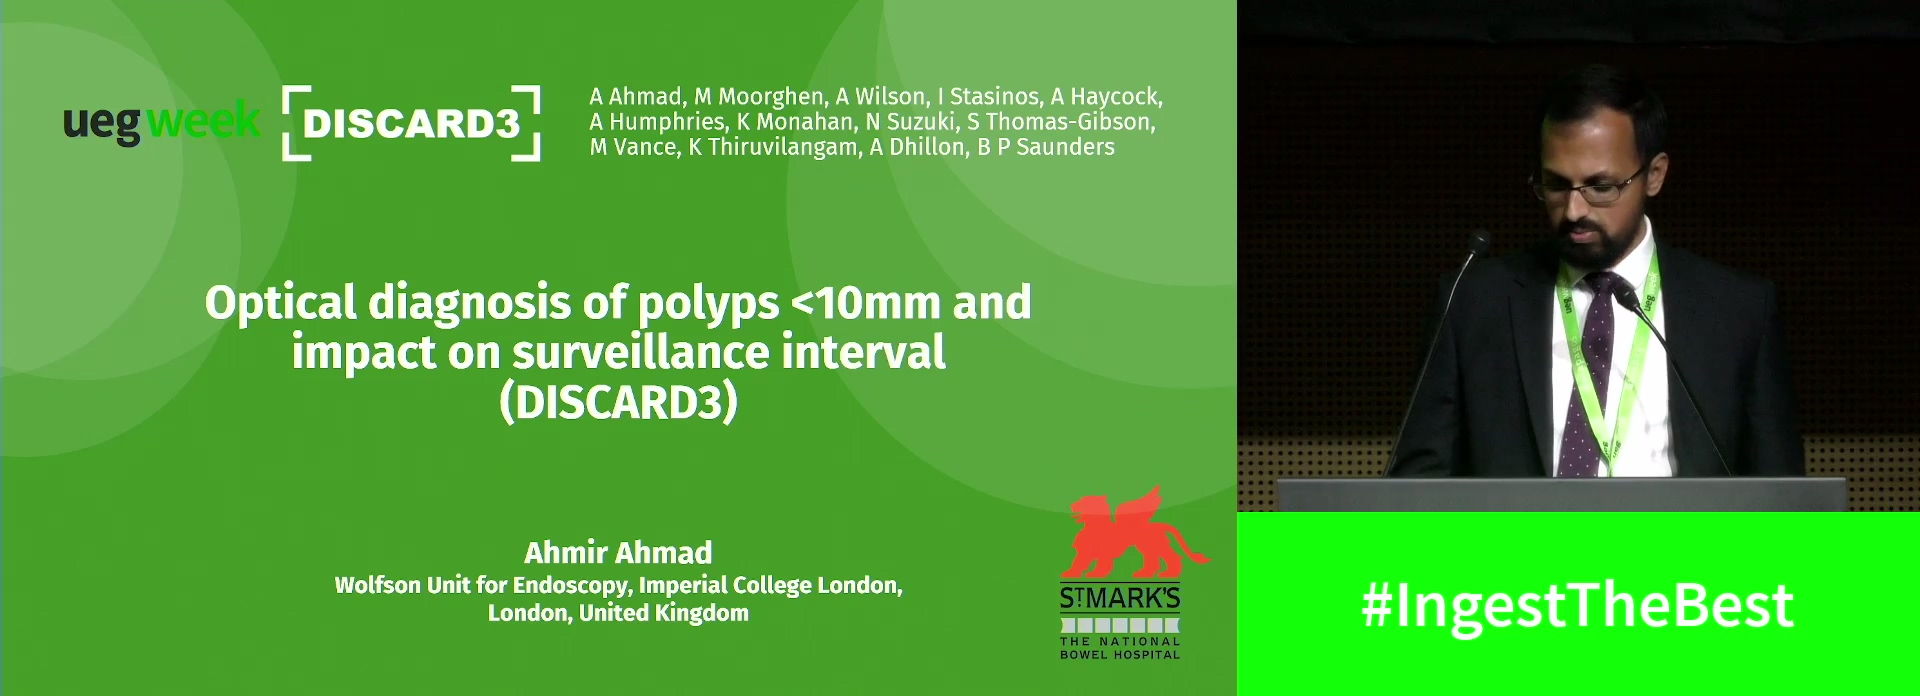 OPTICAL DIAGNOSIS OF POLYPS &LT;10MM AND IMPACT ON SURVEILLANCE INTERVAL (DISCARD3)